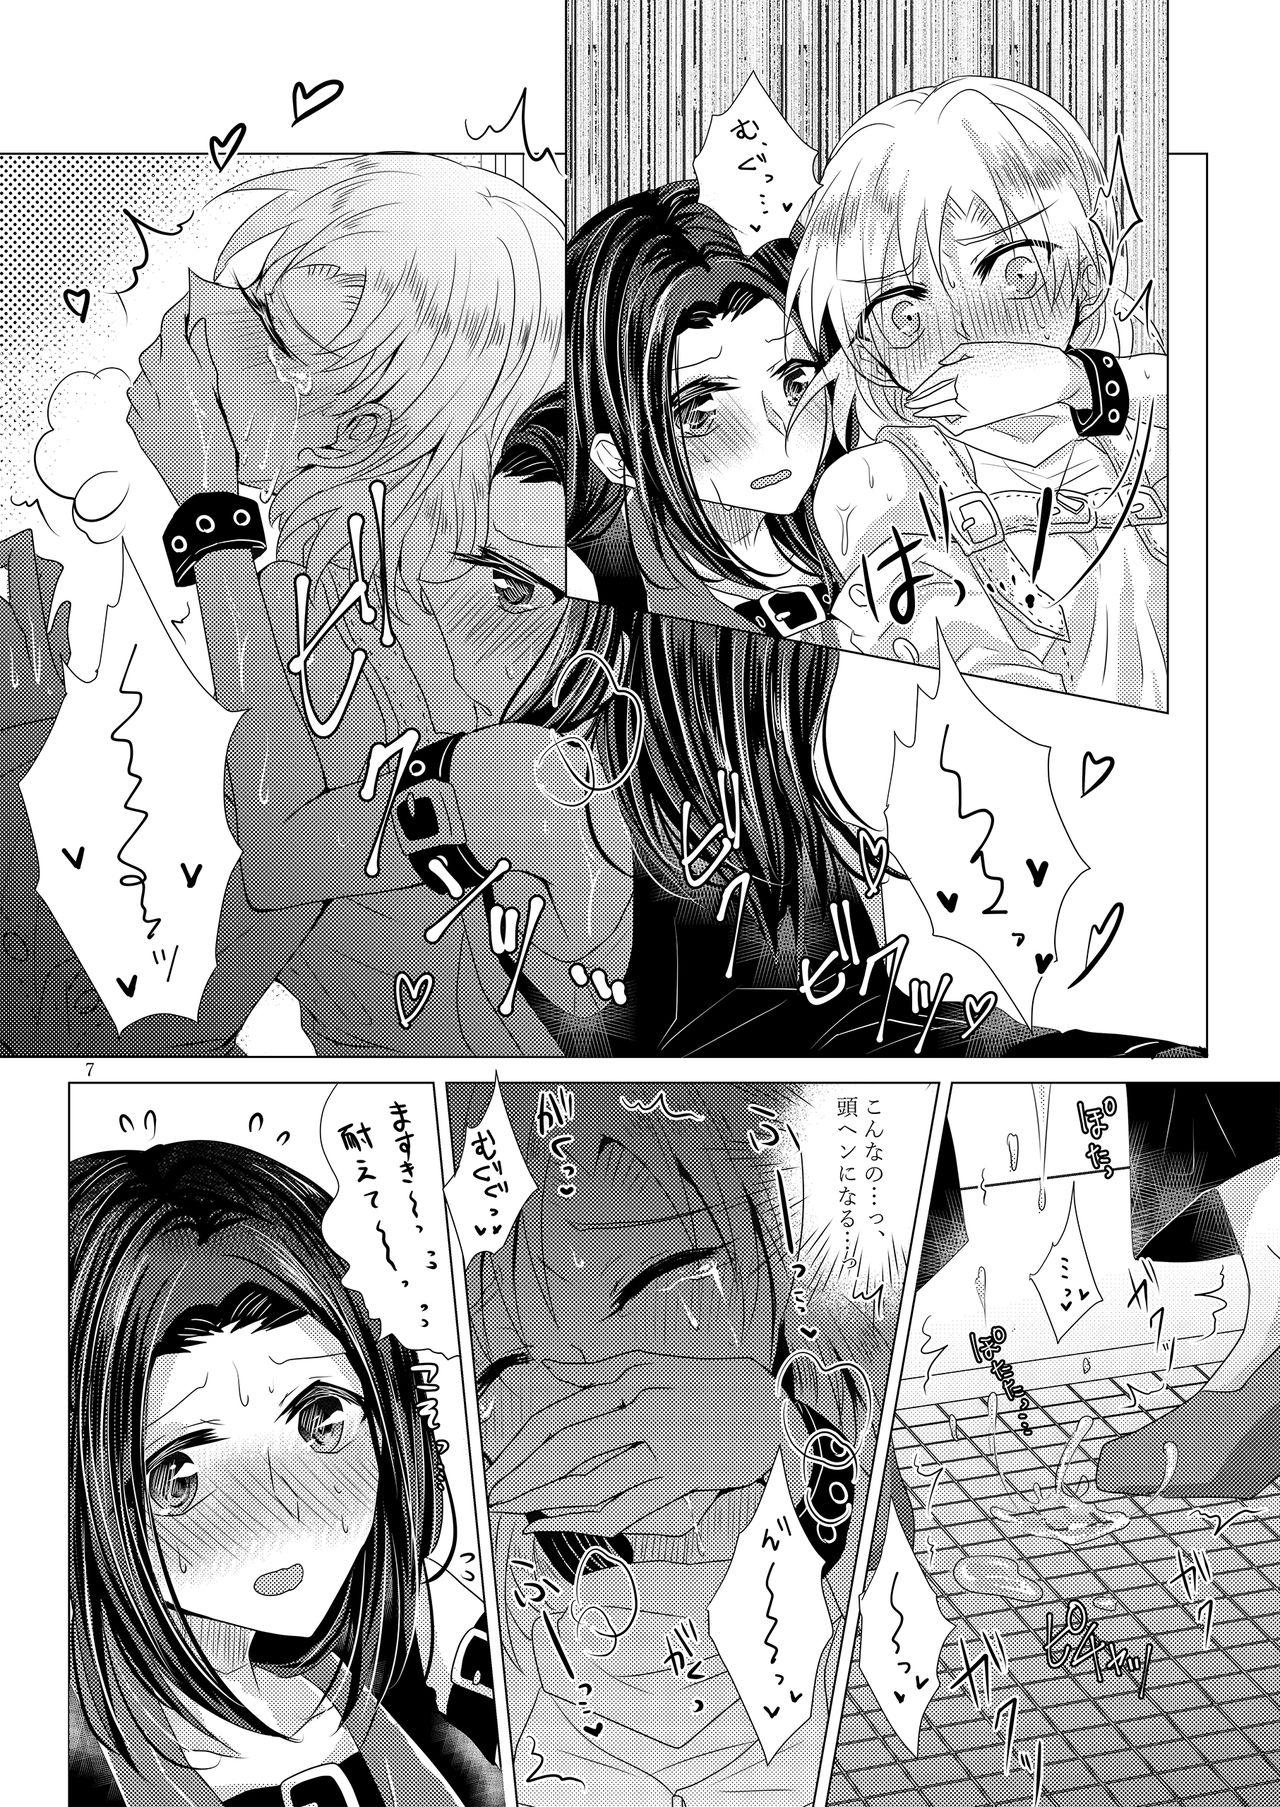 Sissy Feeling High & Satisfied - Bang dream Gay 3some - Page 6